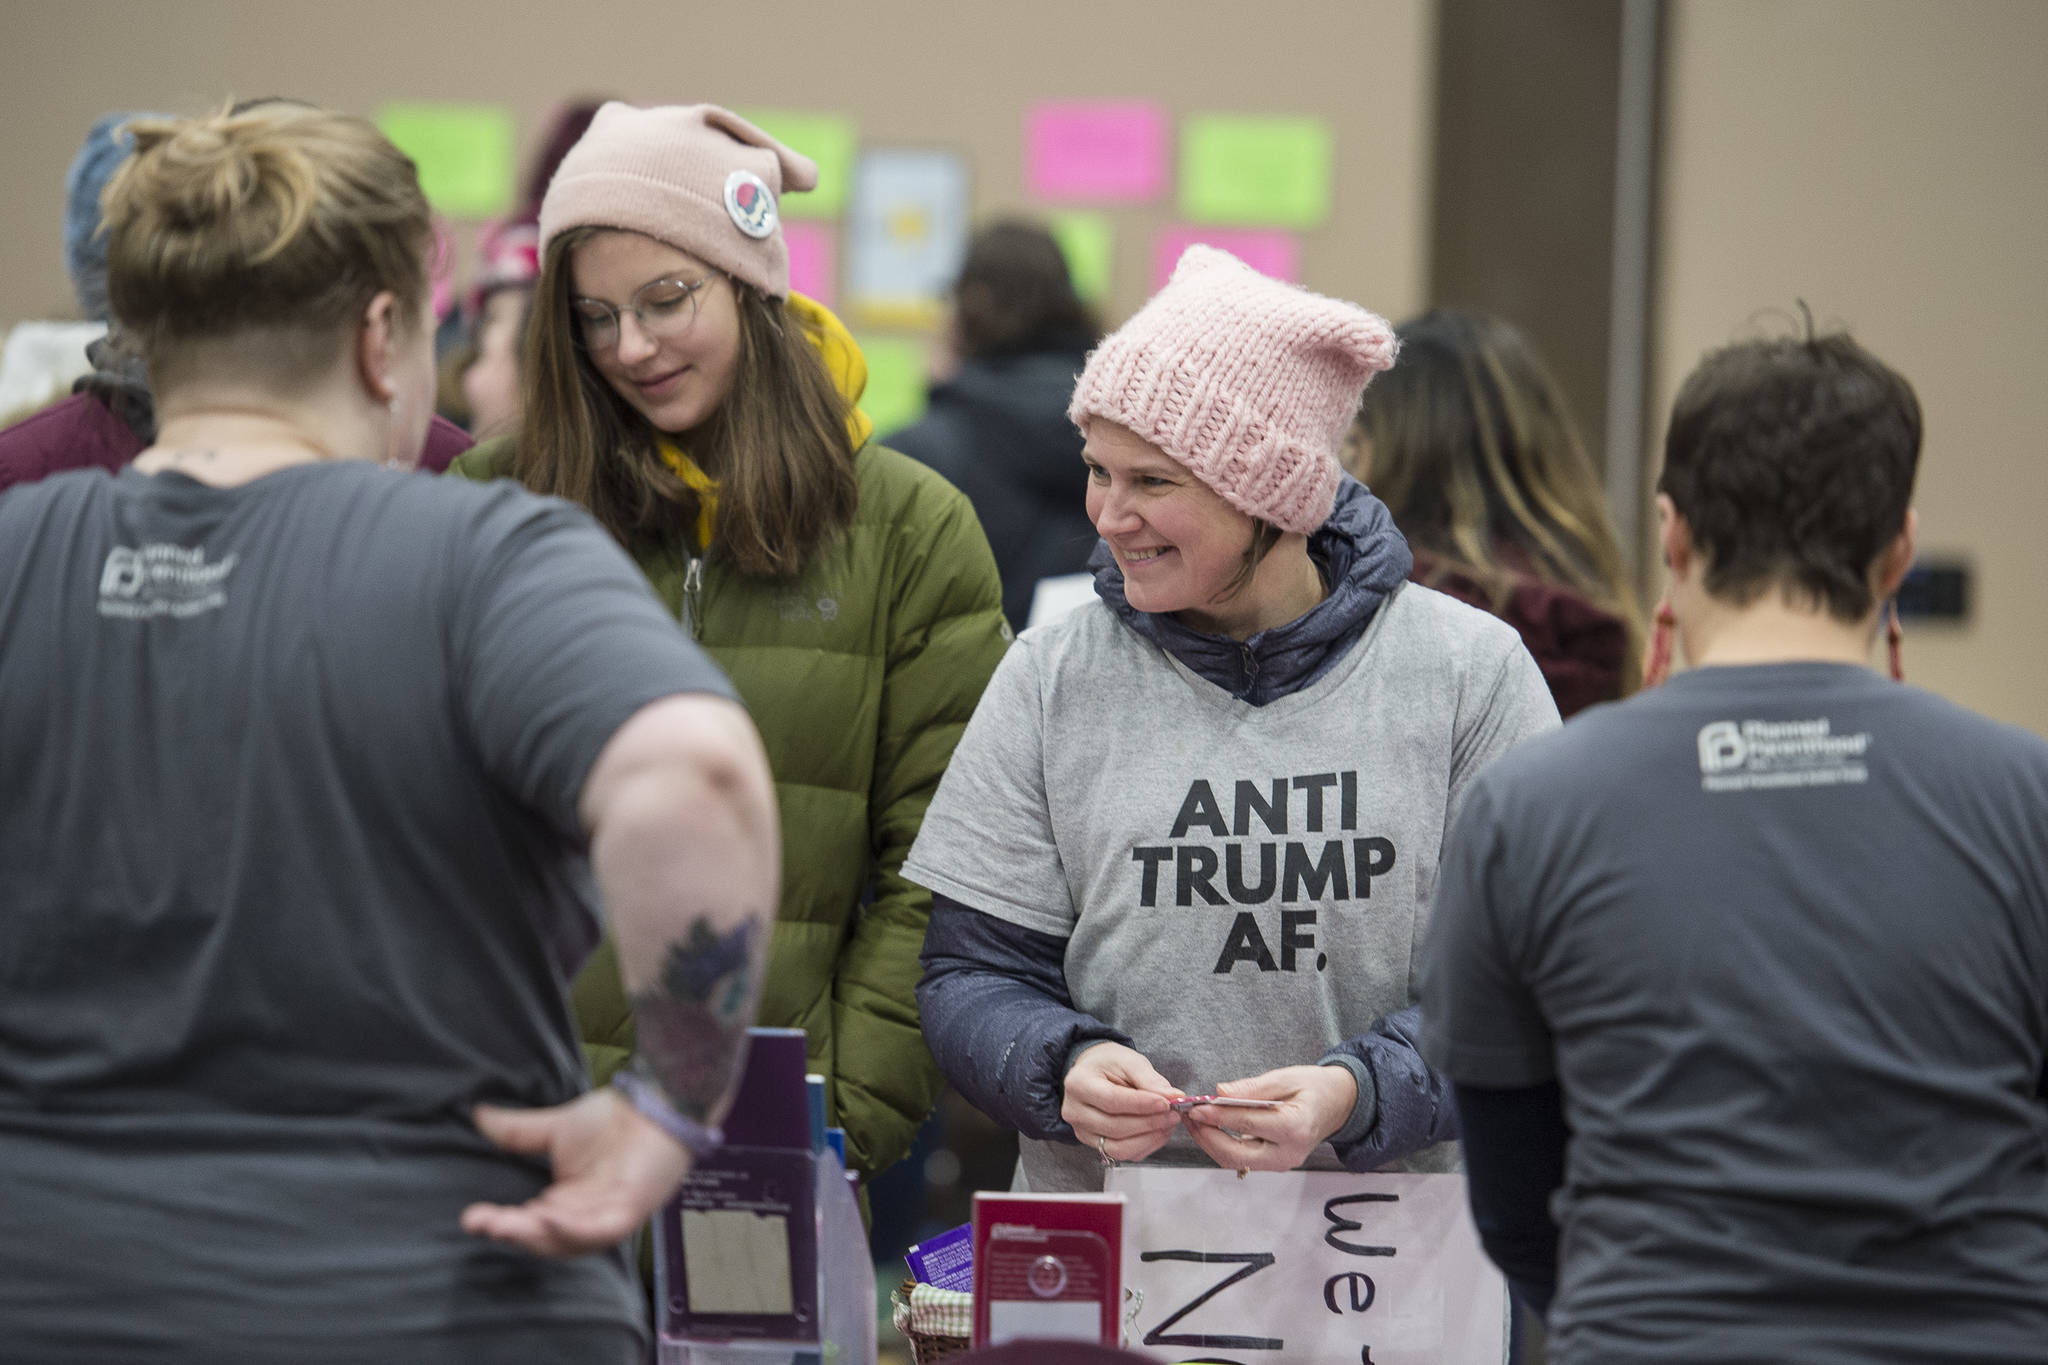 Scenes from the Women’s March on Juneau in front of the Alaska State Capitol on Saturday, Jan. 19, 2019. (Michael Penn | Juneau Empire)